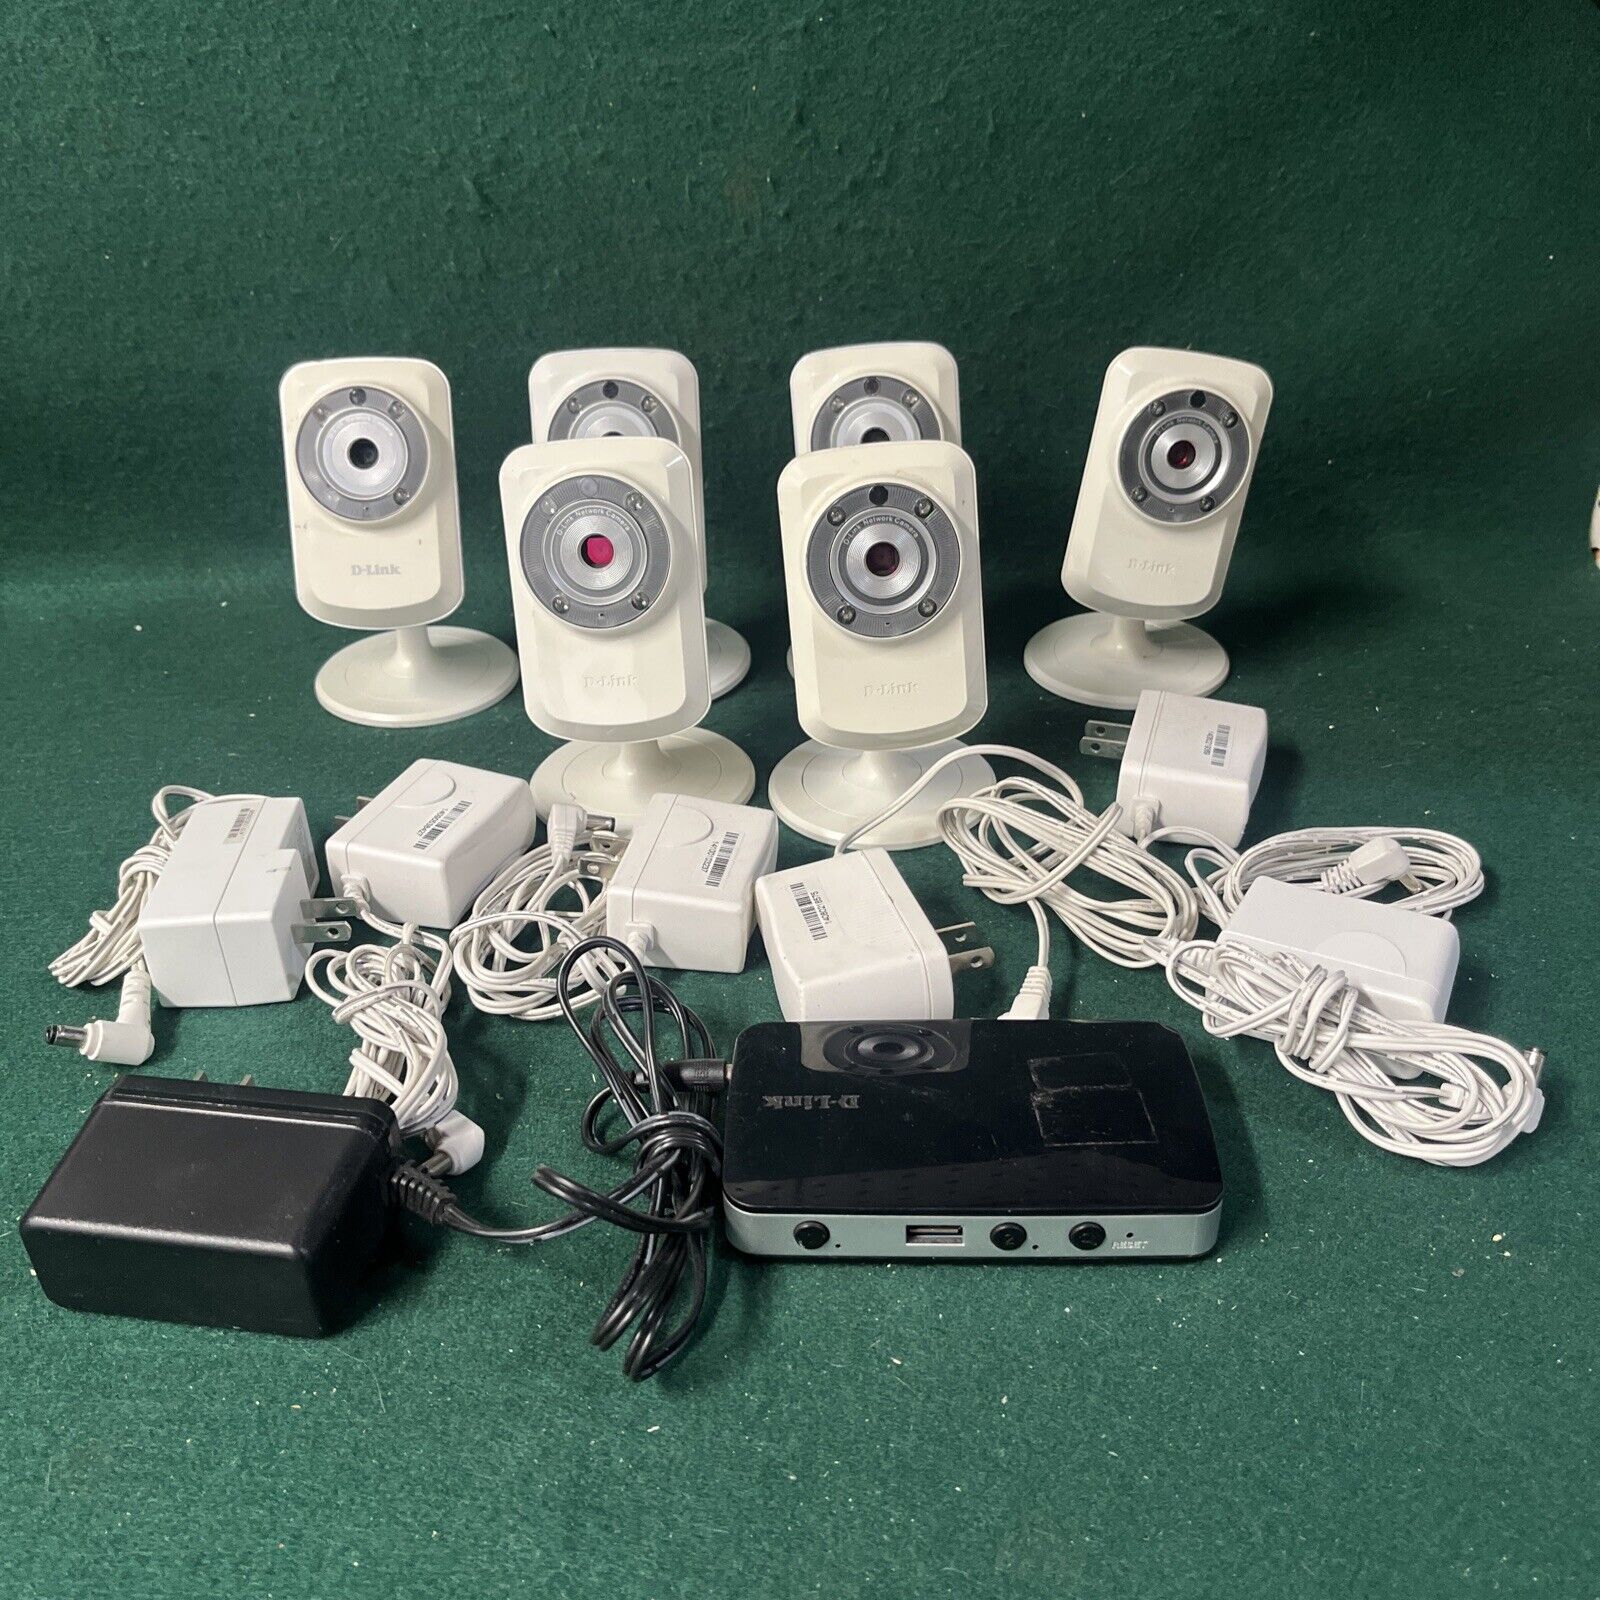 D-Link DCS-932L Web Cam Day & Night Wi-Fi Camera Lot Of 6 With Recorder